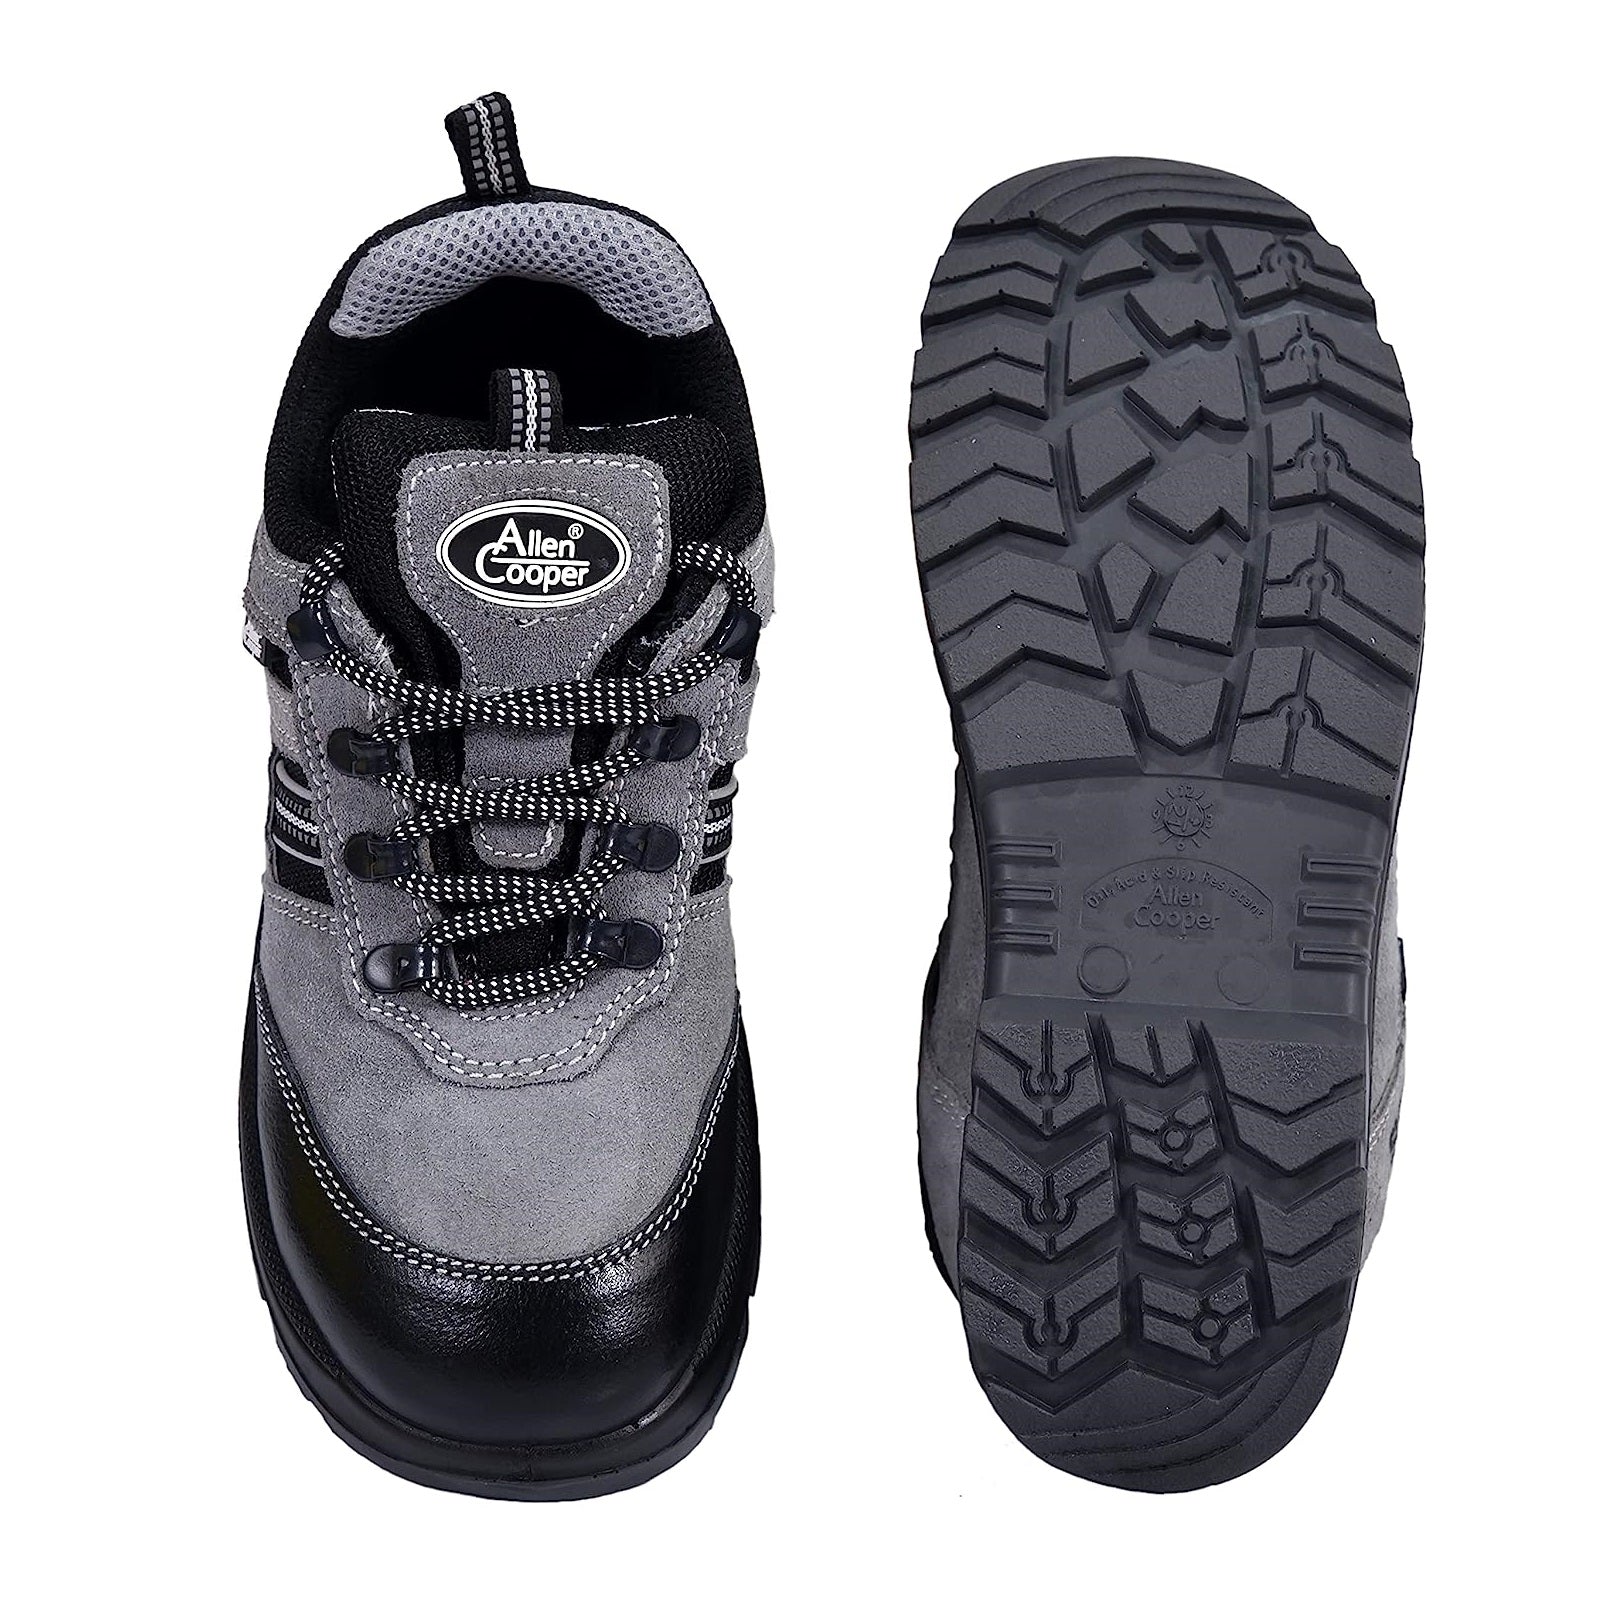 Allen Cooper Sporty Low Ankle Safety Shoe AC-1156